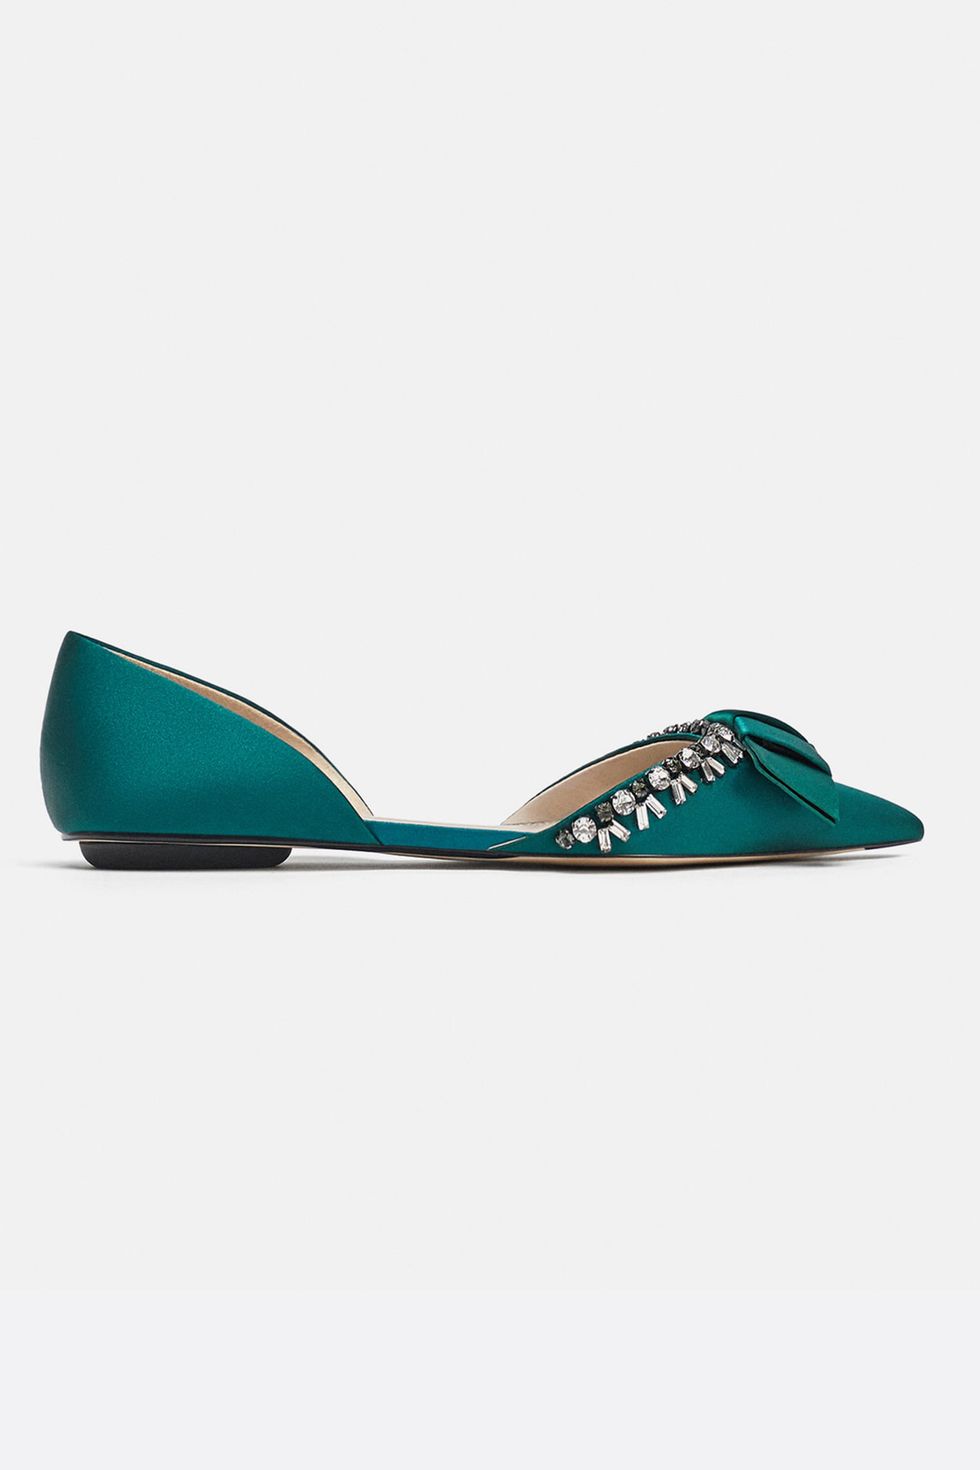 Footwear, Turquoise, Shoe, Green, Teal, Aqua, Ballet flat, Turquoise, Fashion accessory, Leather, 